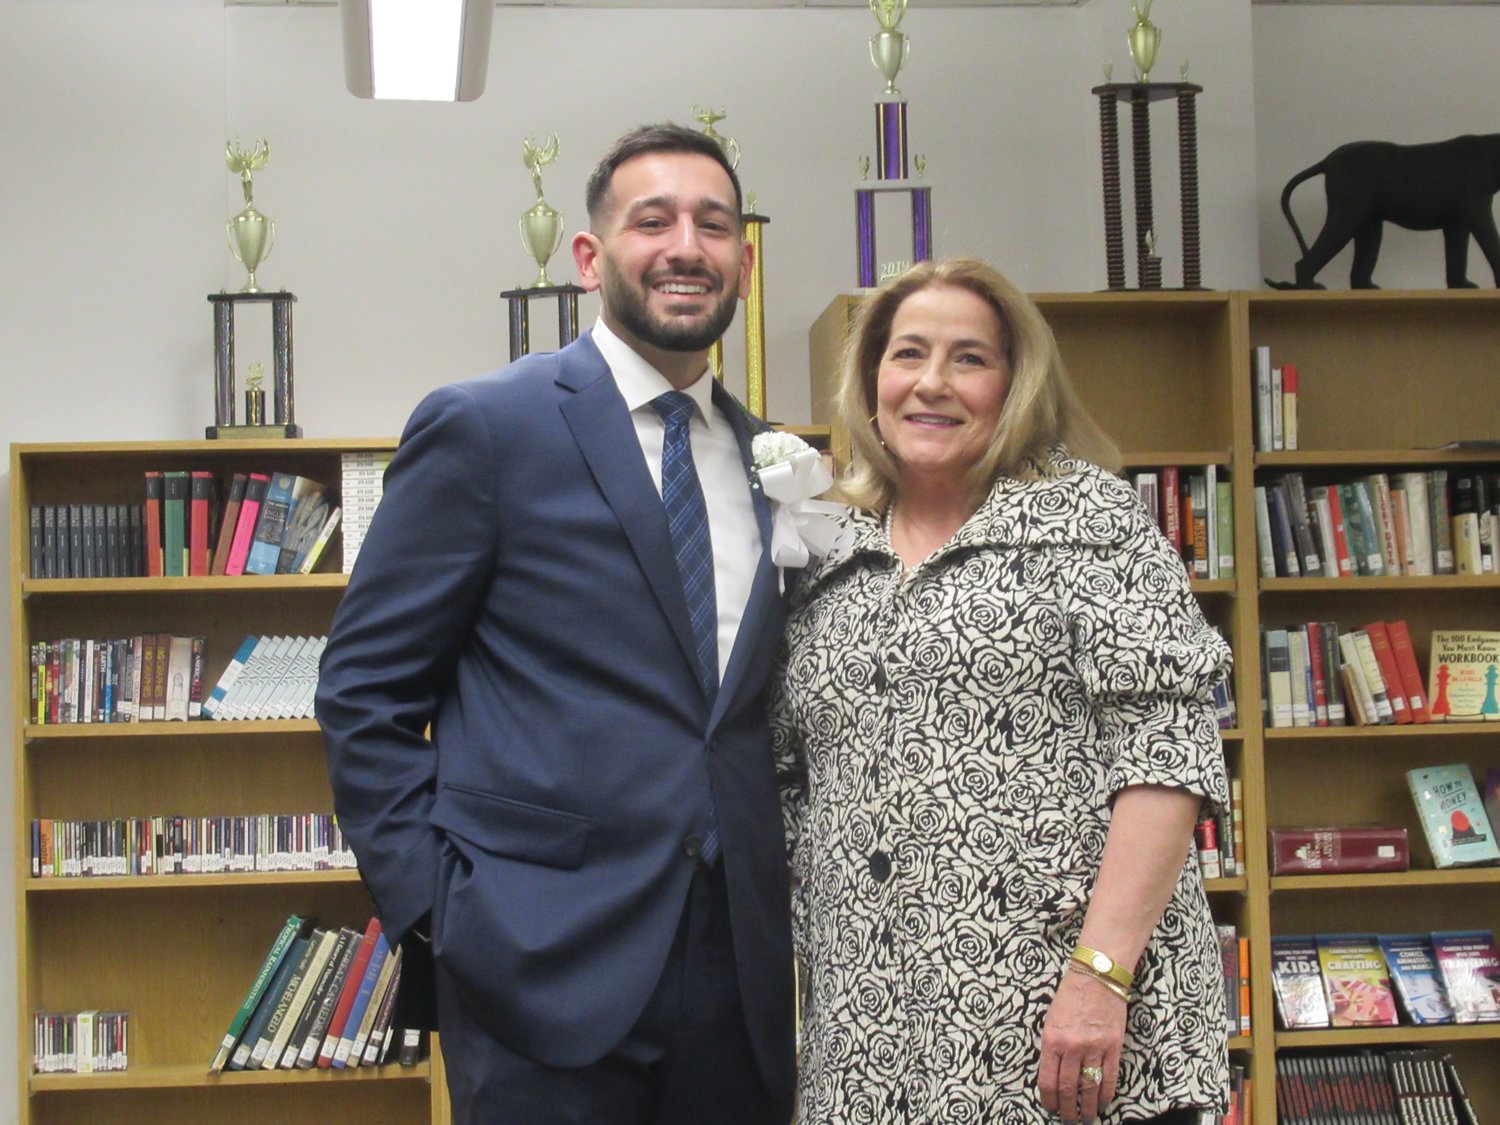 SPECIAL SON: Lucy Polisena is all smiles as she joins her son – Mayor Joseph Polisena Jr. – who was sworn in at an inauguration ceremony last Monday night.